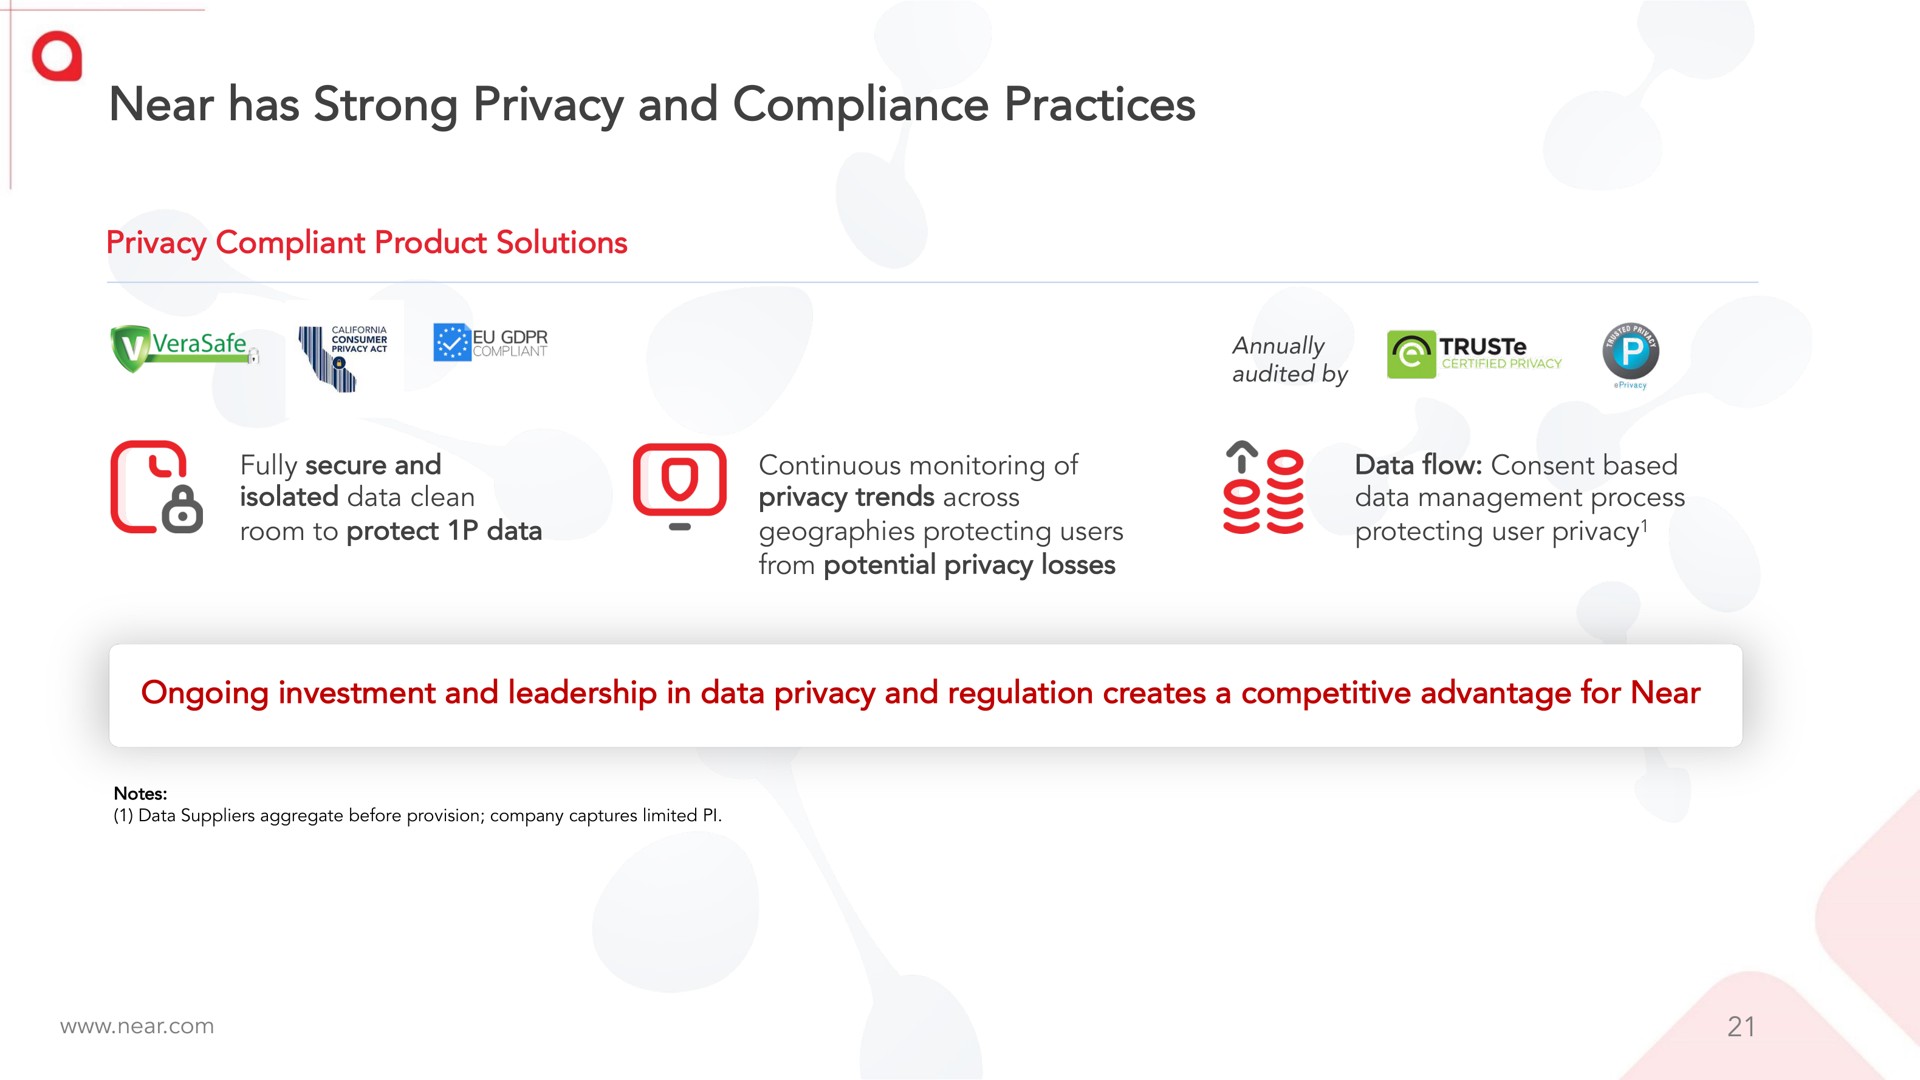 near has strong privacy and compliance practices | Near